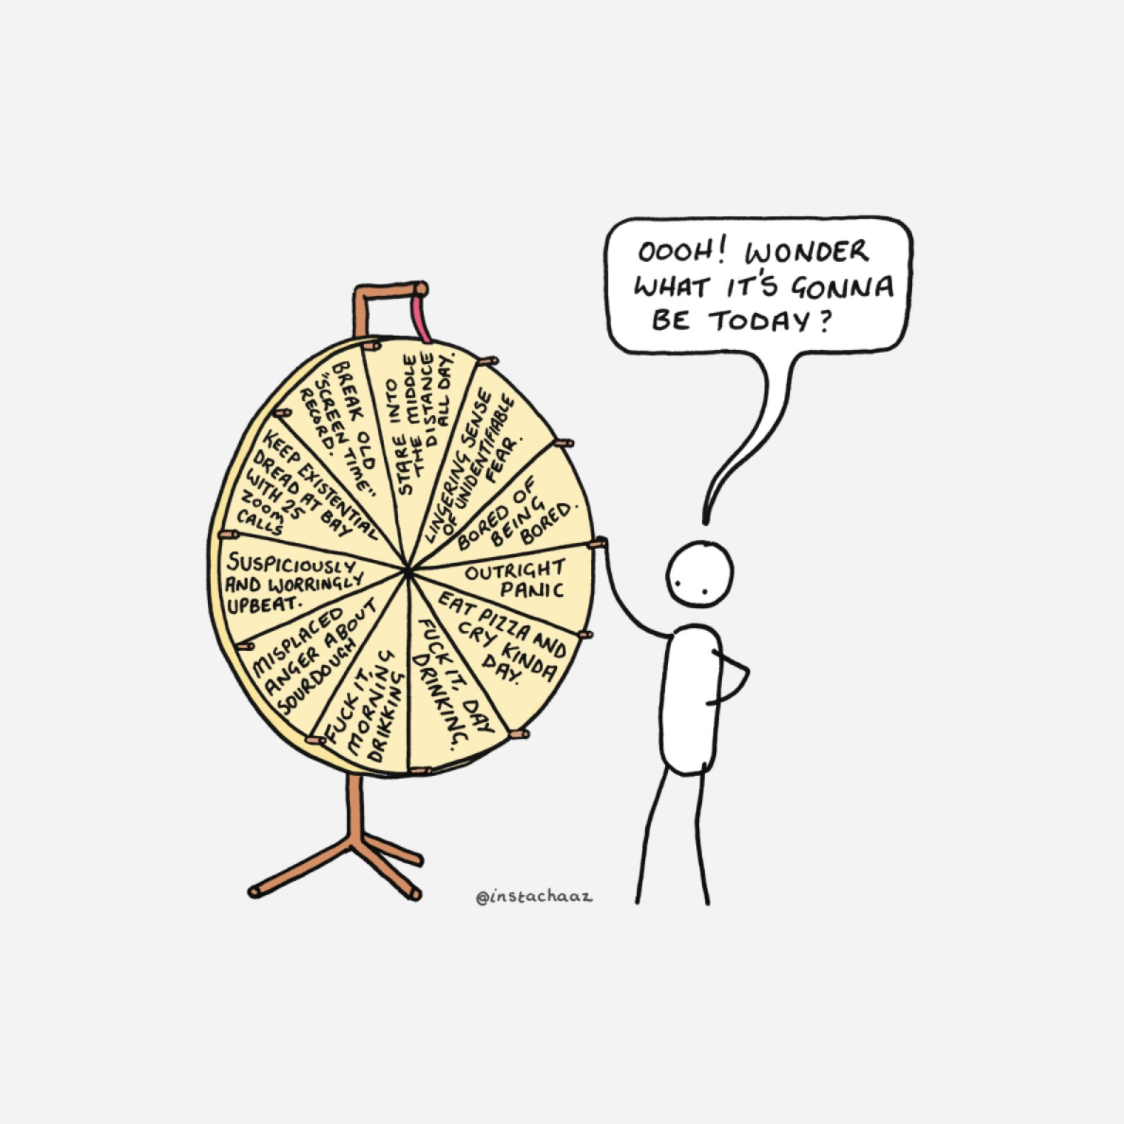 A stick figure standing in front of a Wheel of Fortune style wheel, where each possible option is something regrettable, and the person's thought bubble says 'Ooh! Wonder what it's going to be today?'